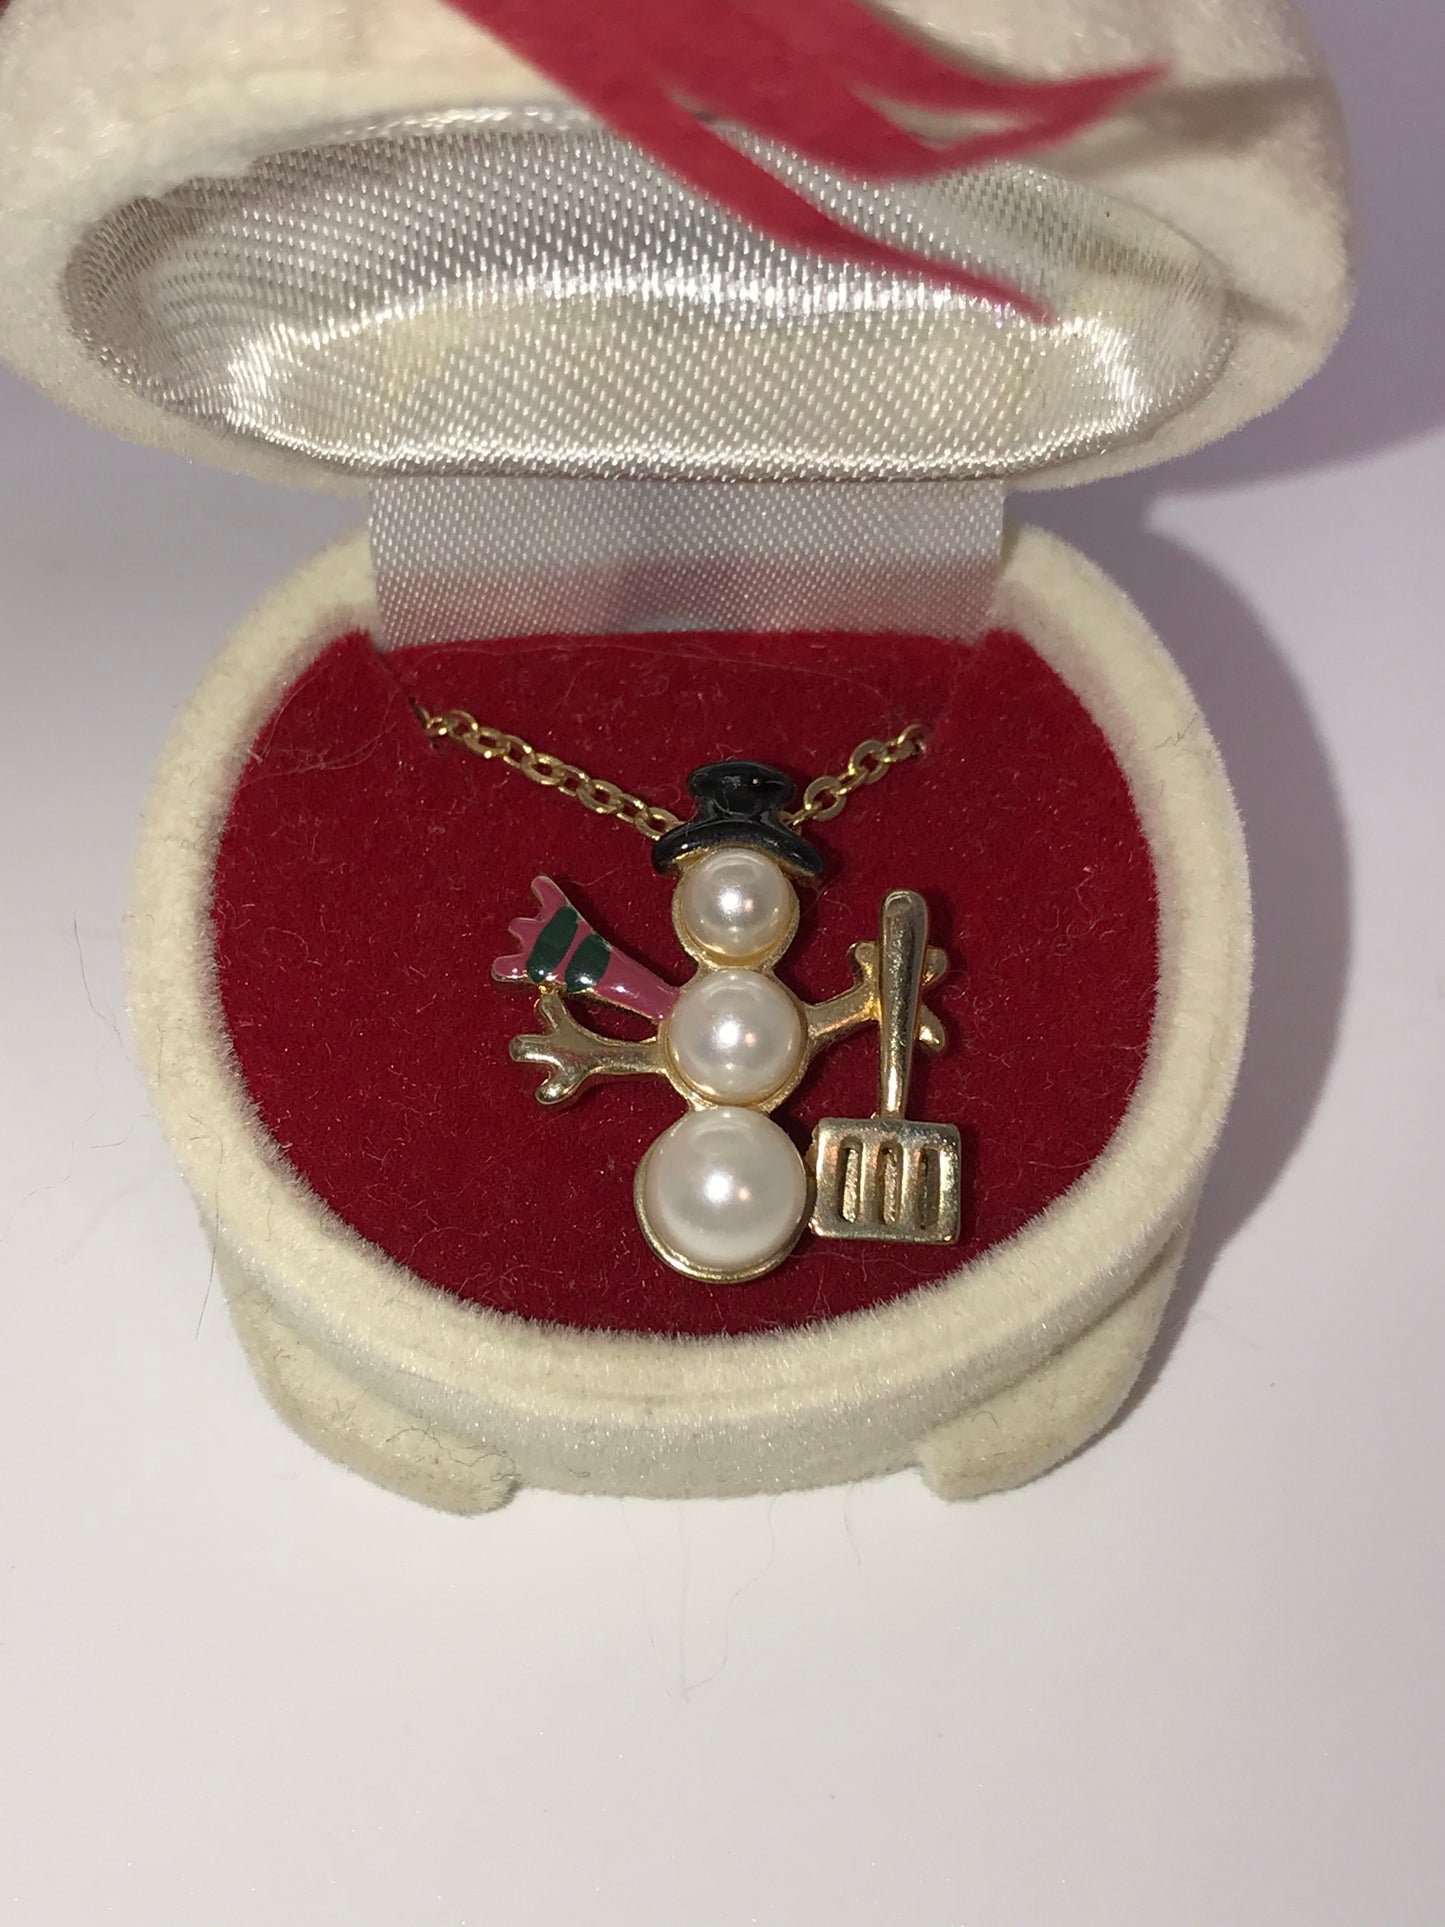 18" Snowman Necklace and jewelry box